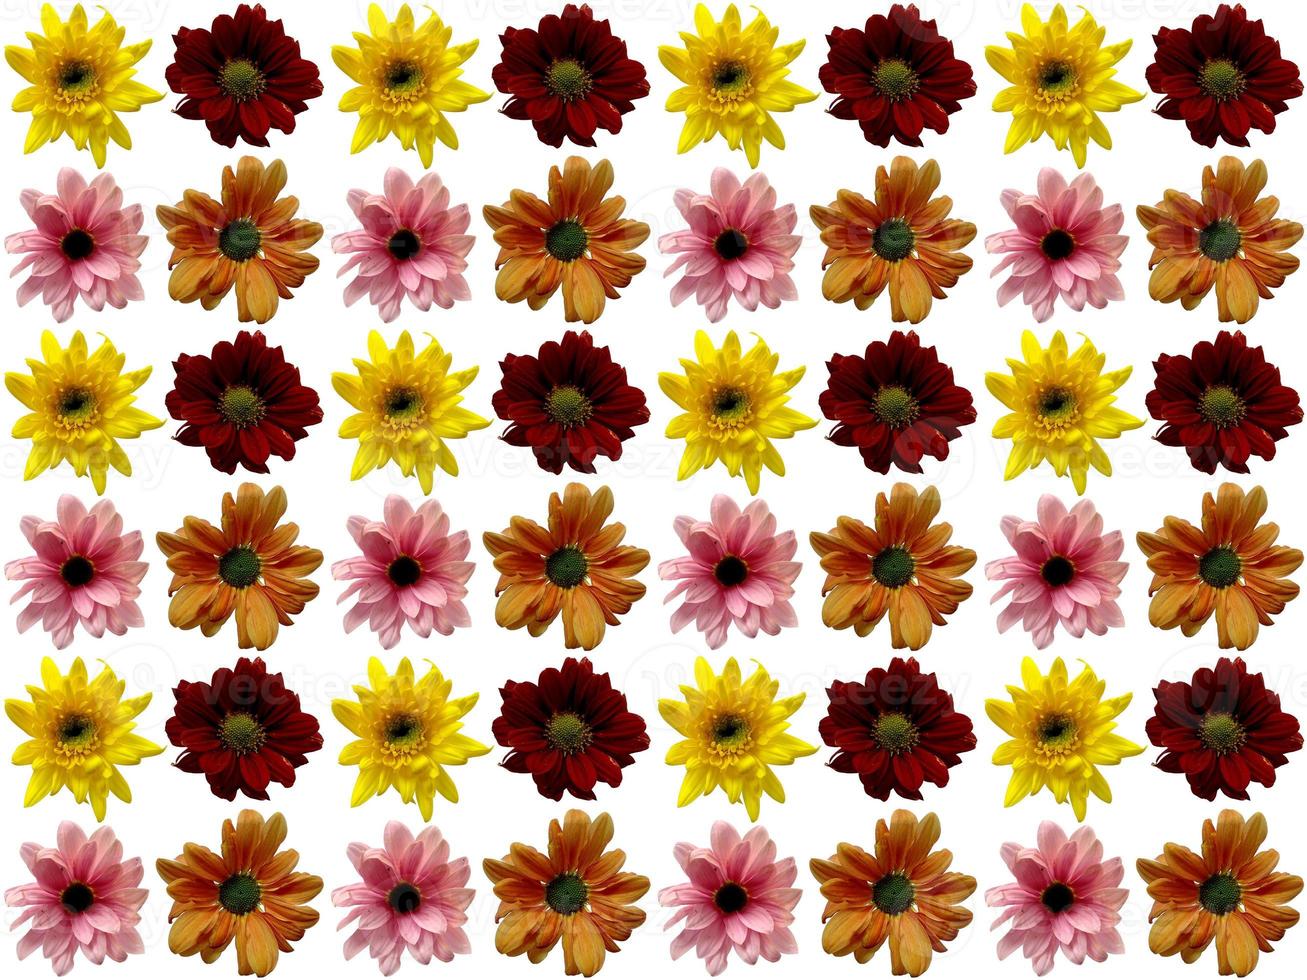 Floral Pattern background photo